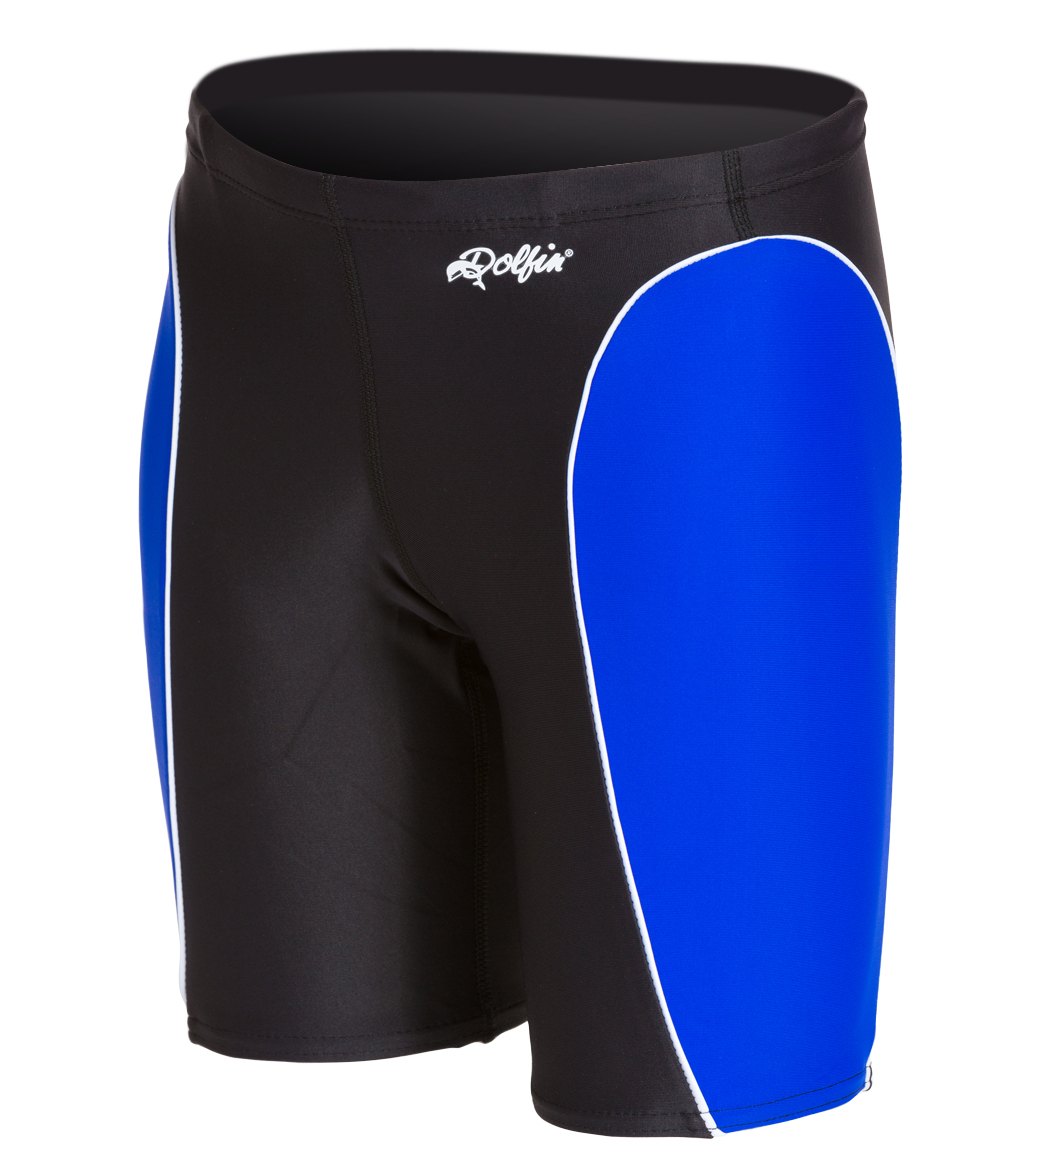 Dolfin Team Color Block Youth Jammer Swimsuit - Black/Royal/White 22 Polyester - Swimoutlet.com